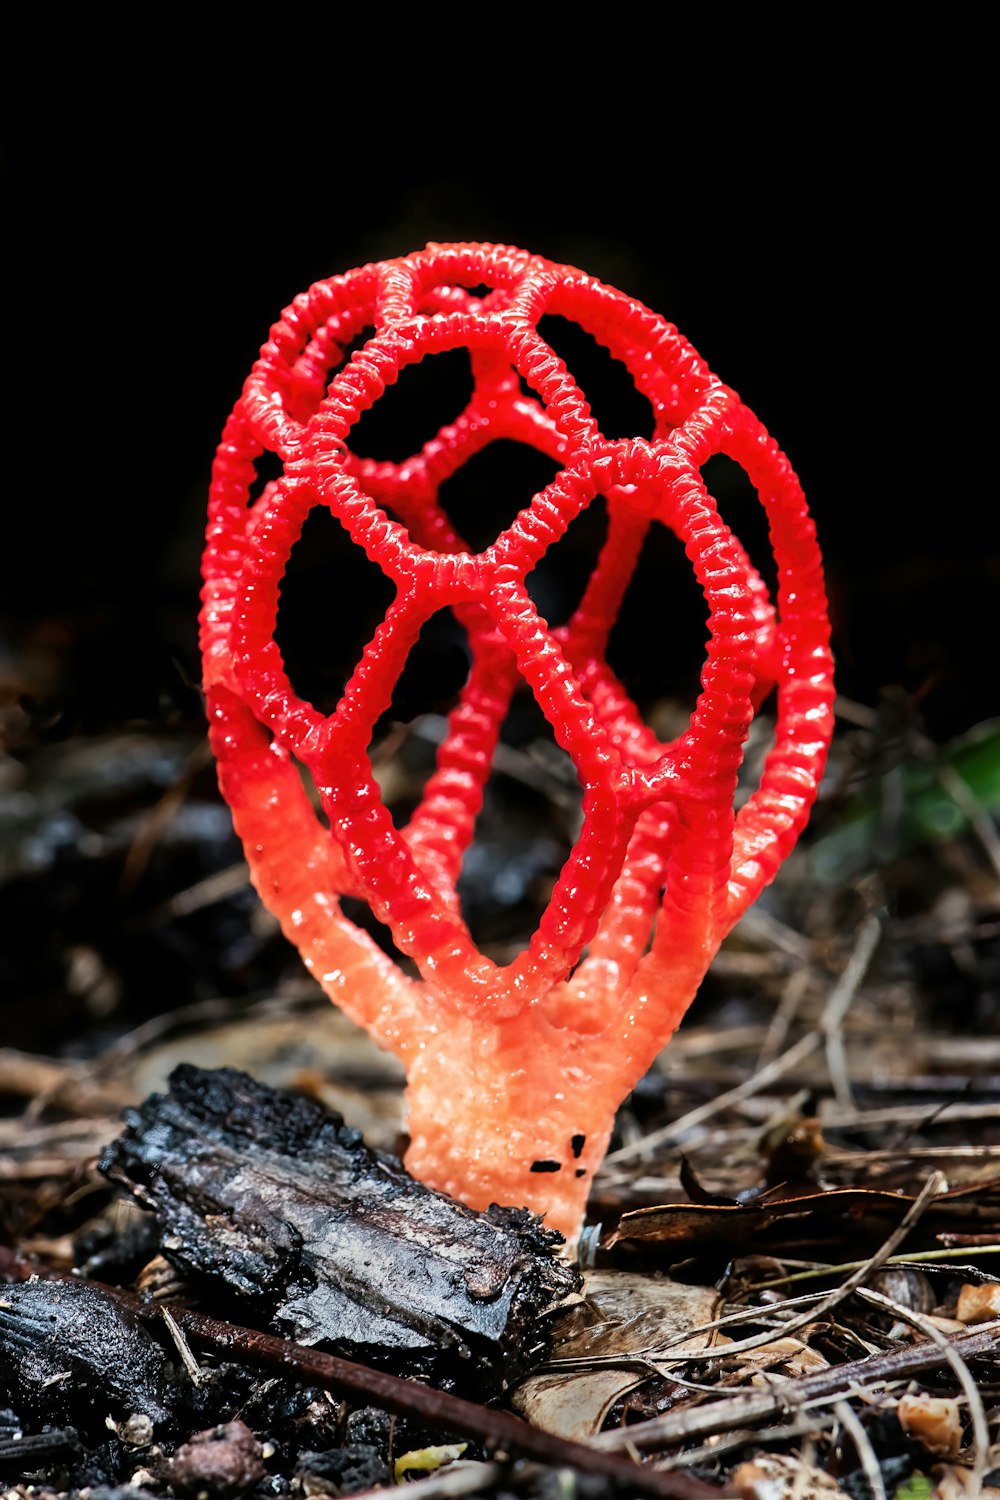 a close up of a red object on the ground